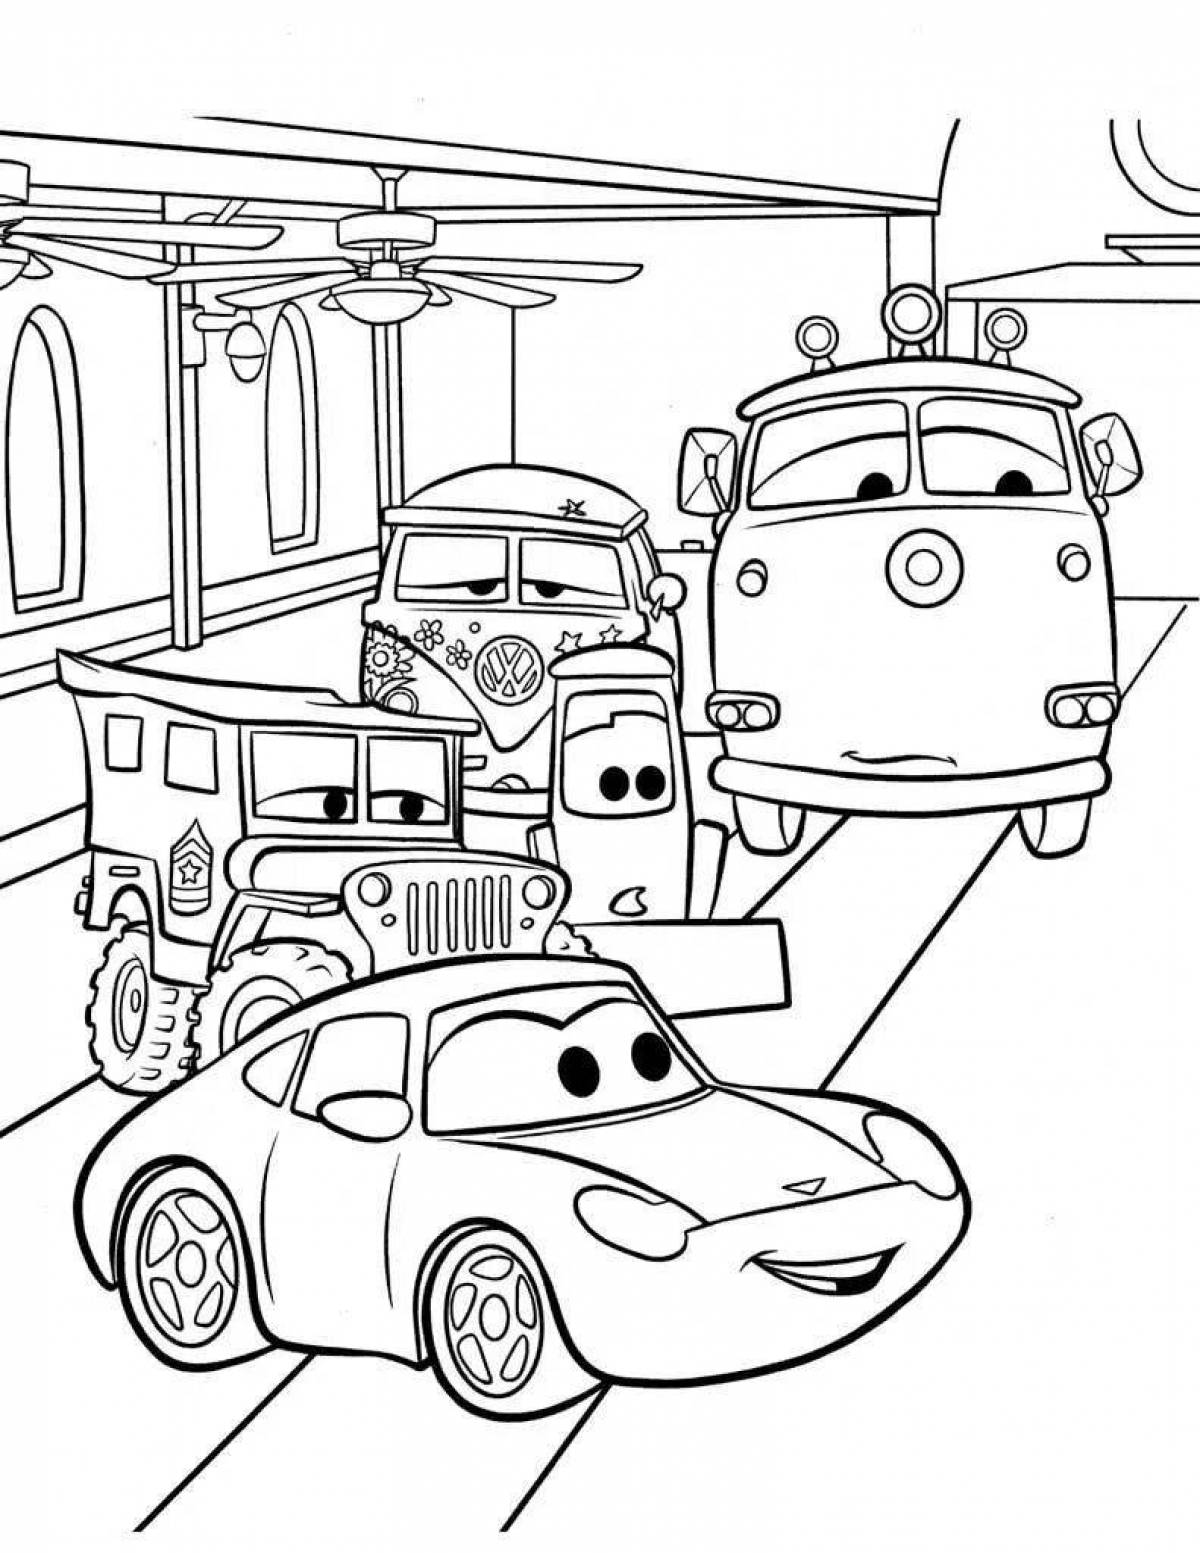 Colourful cars coloring pages for boys